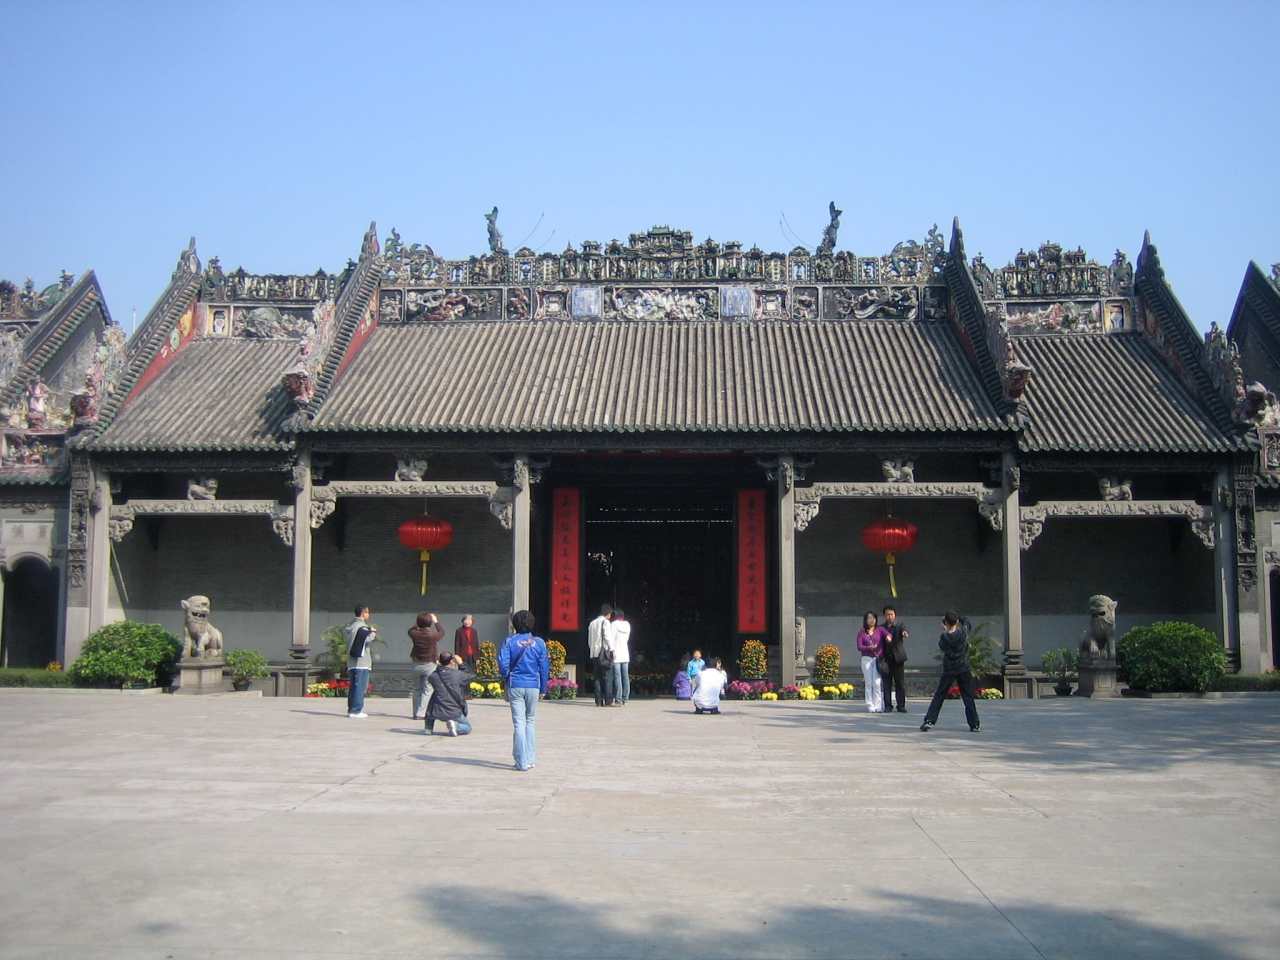 Ancestral Temple of the Chen Family (Chen Clan Academy), Guangzhou, China